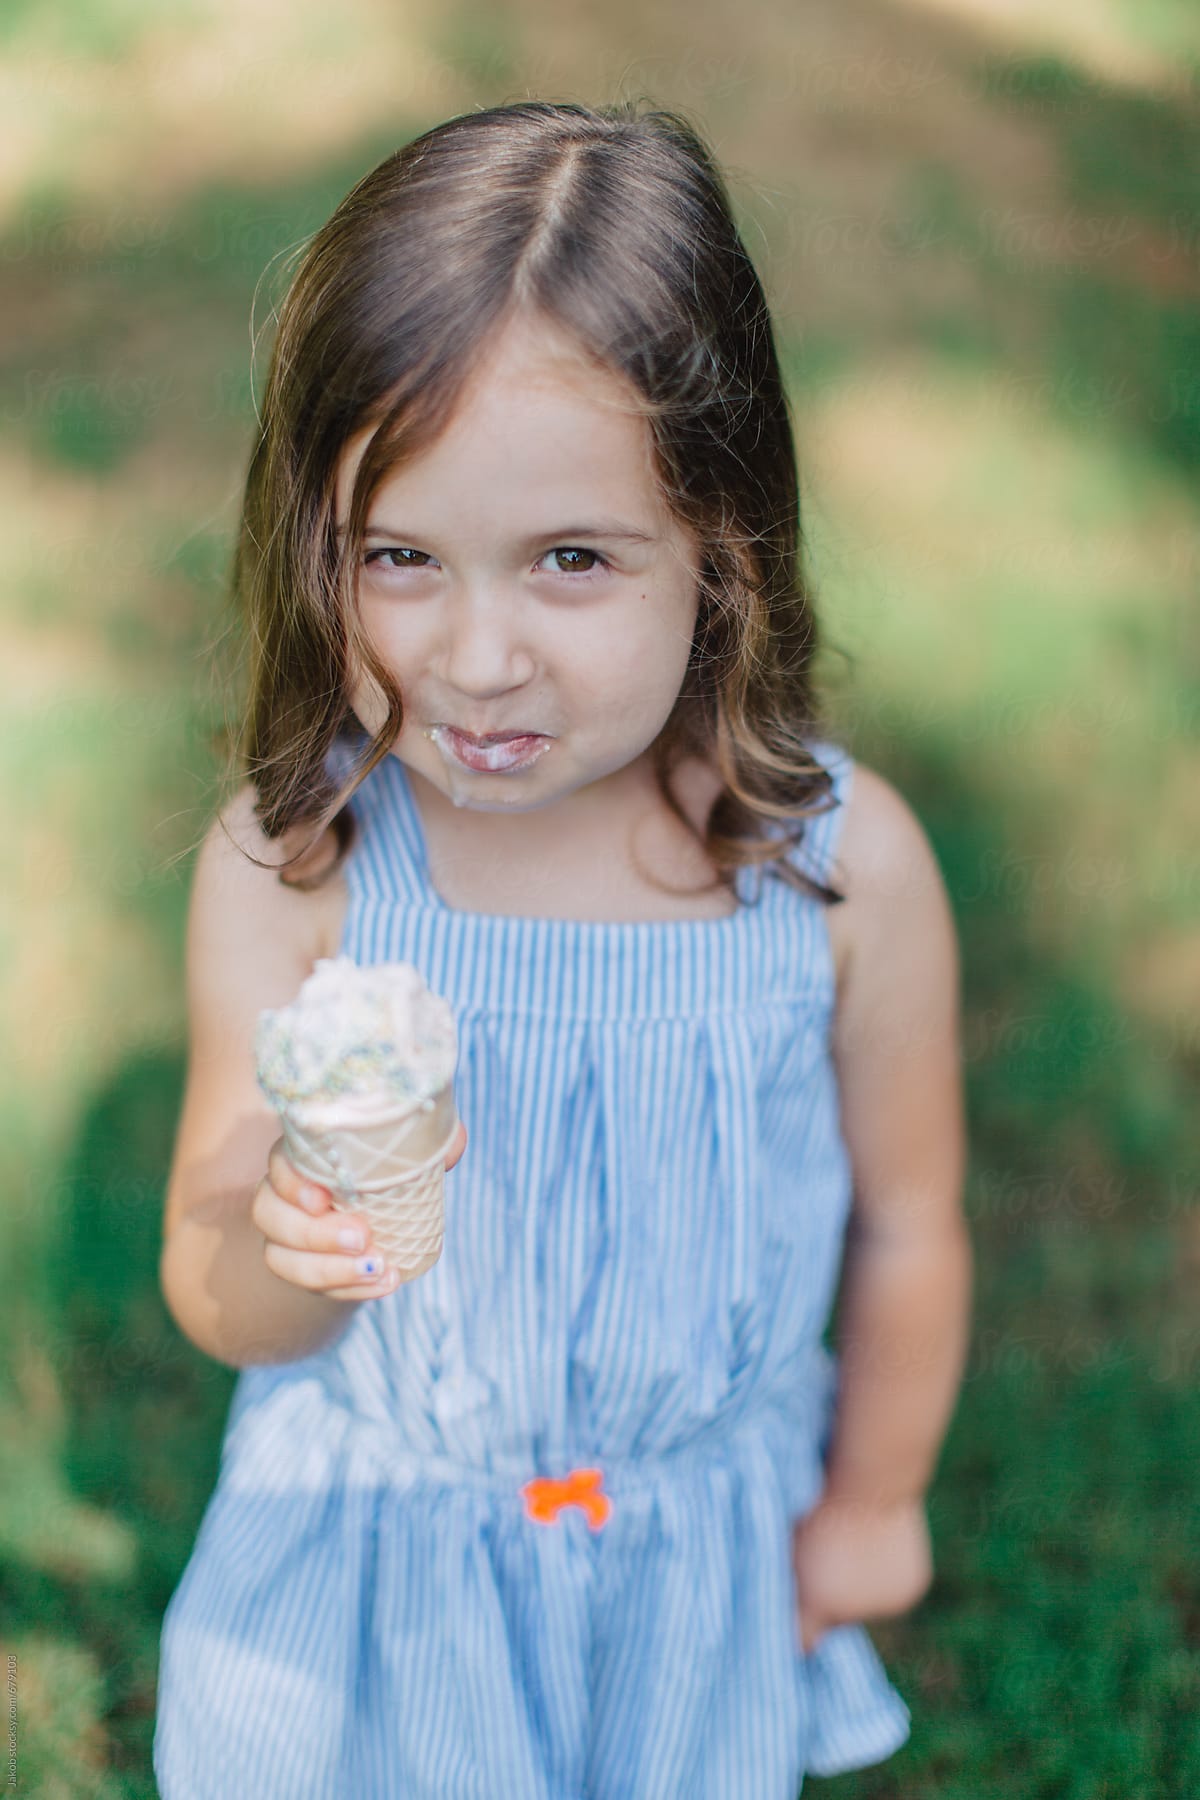 Cute And Happy Young Girl Eating Ice Cream Outside By Stocksy Contributor Jakob Lagerstedt